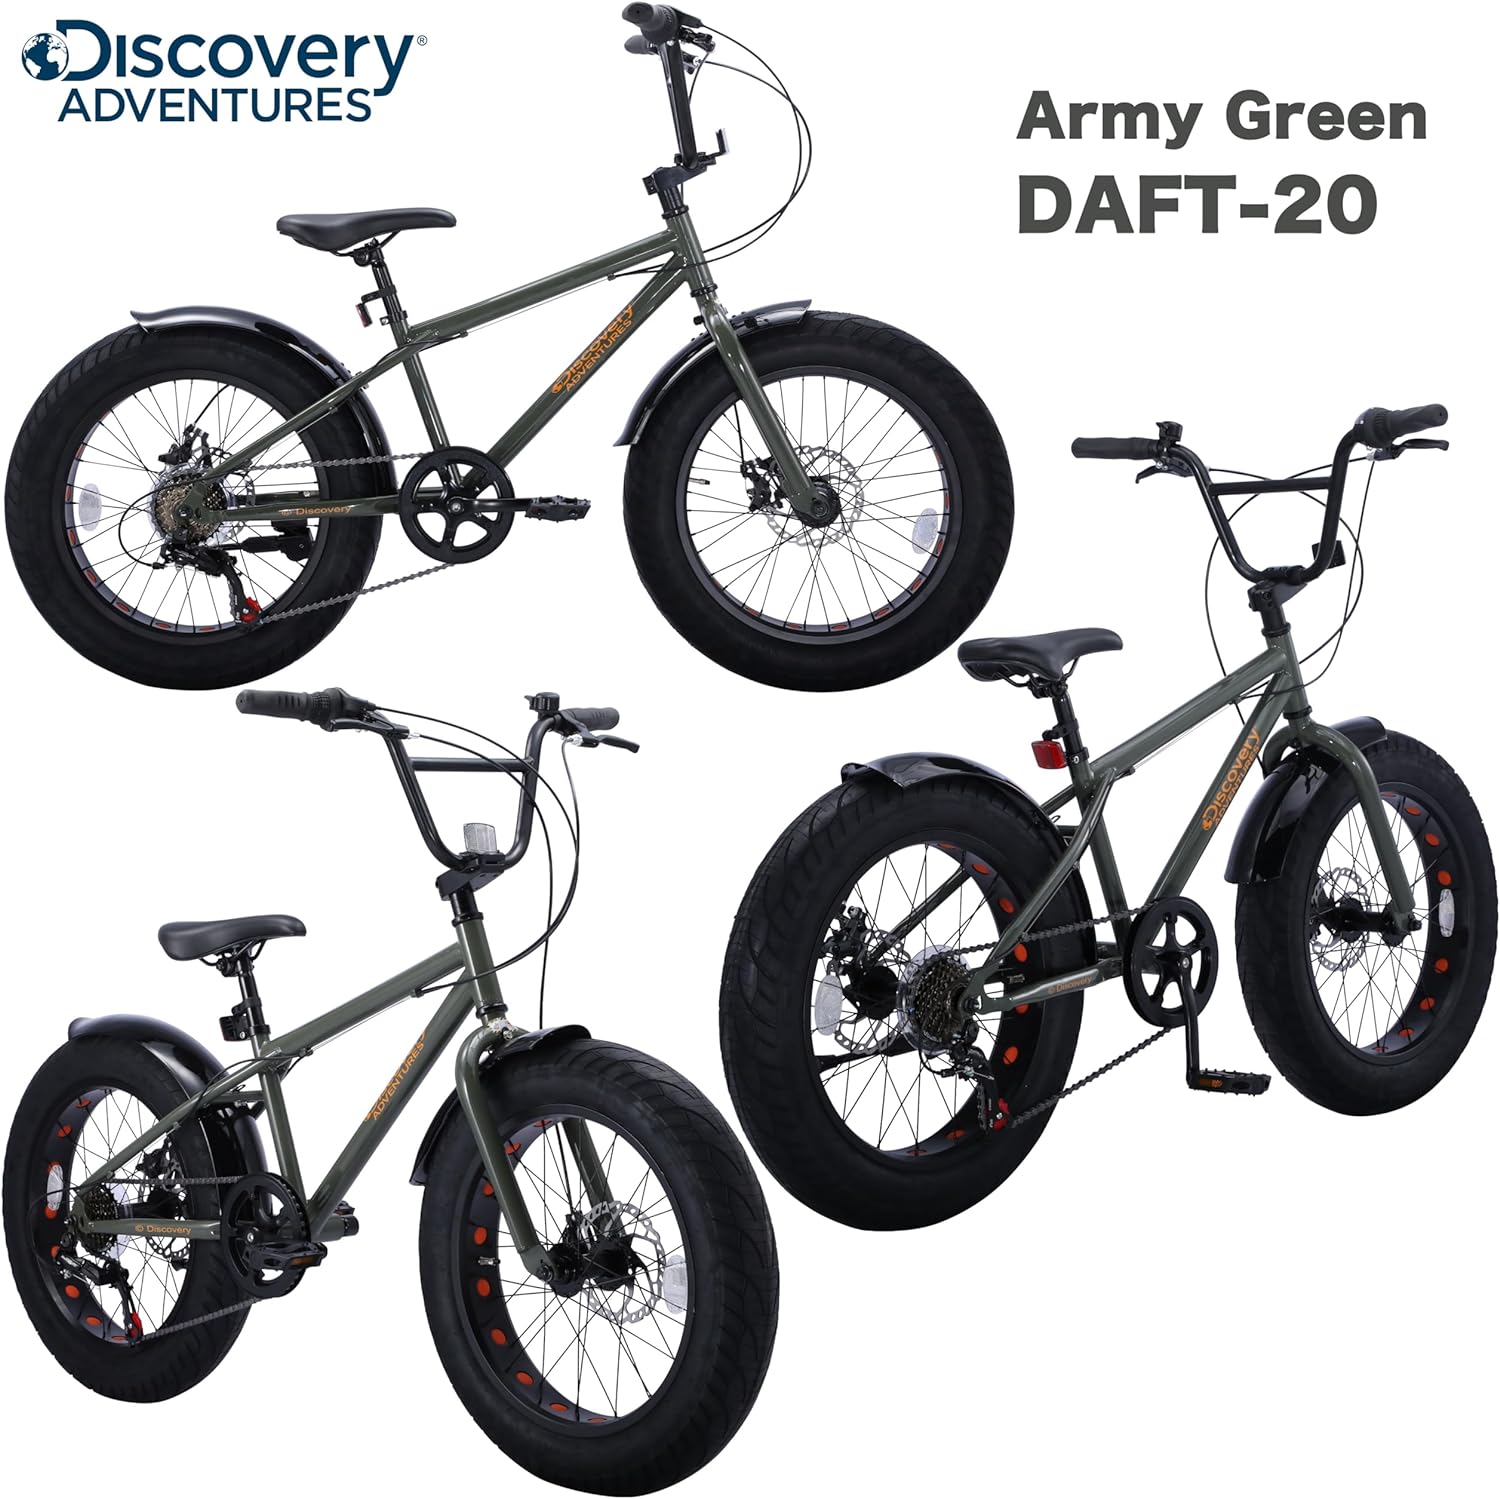 Discovery Adventures ( Discovery adventure z) fatbike Fat City Cruiser BMX bicycle 